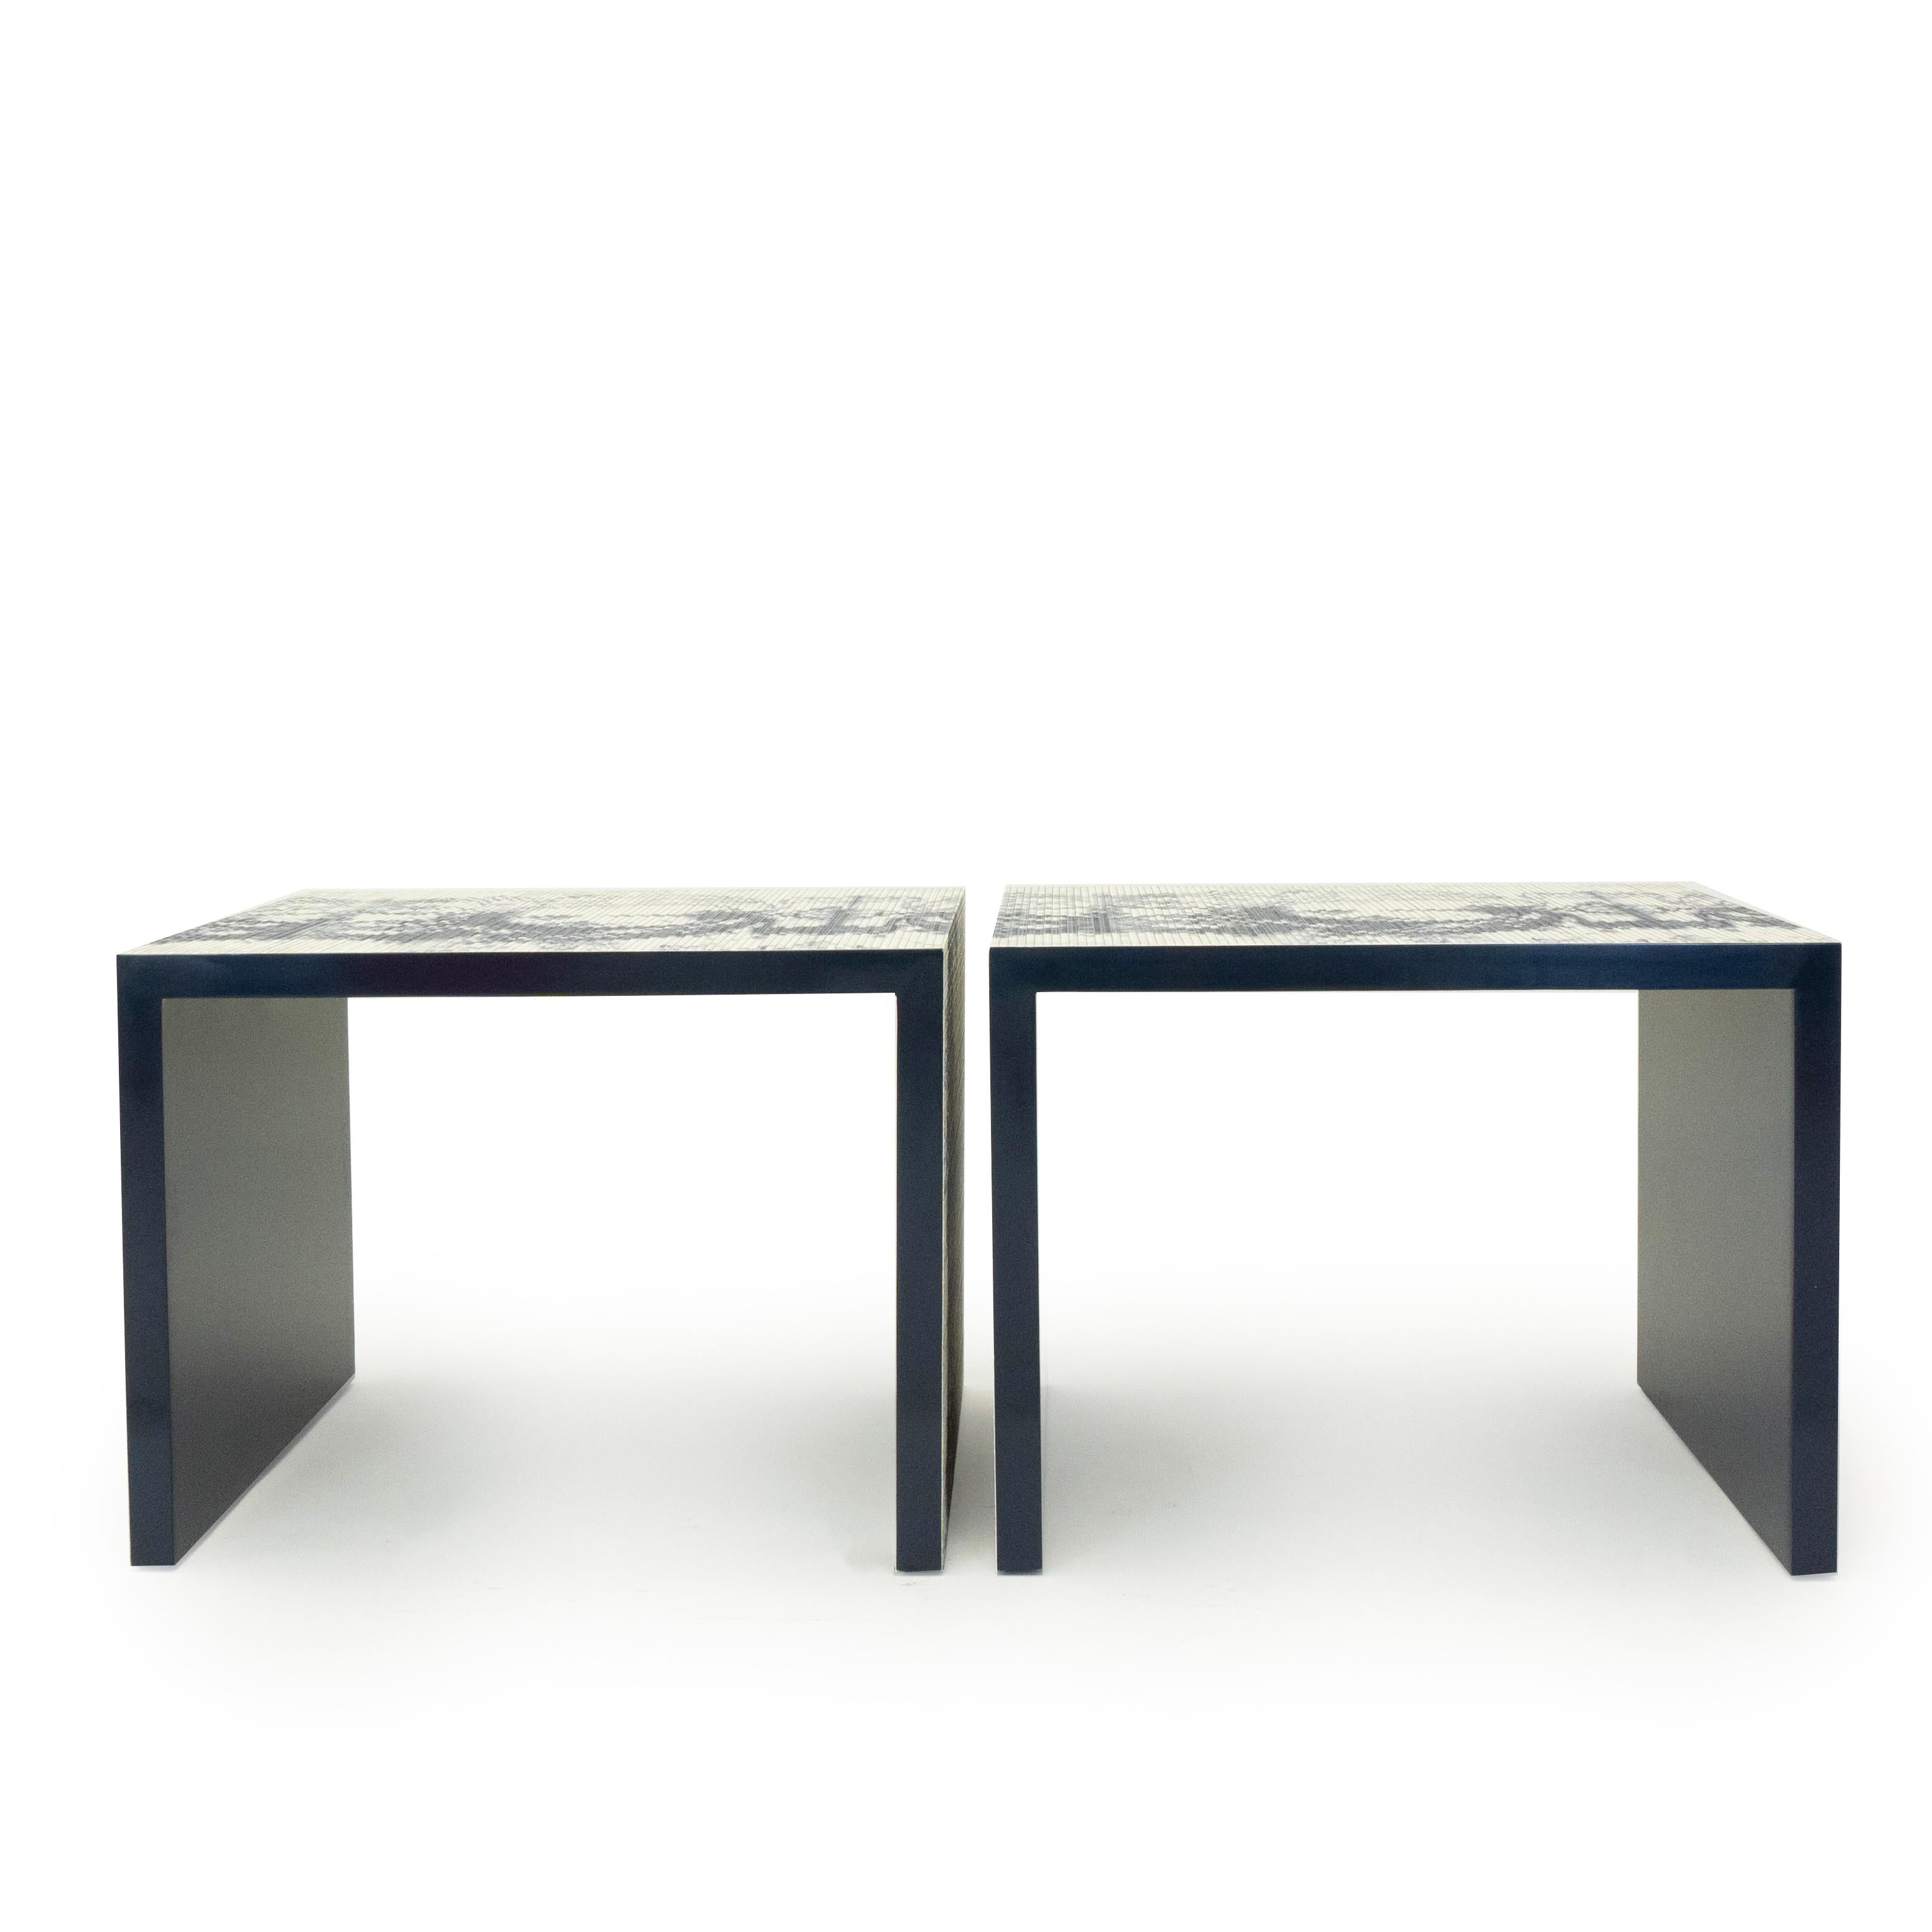 Handmade modern square side tables with a textured vinyl finish painted in a deep royal blue. These tables are made at our studio in Norwalk, Connecticut and can be customized upon request. 

Measurements: 21